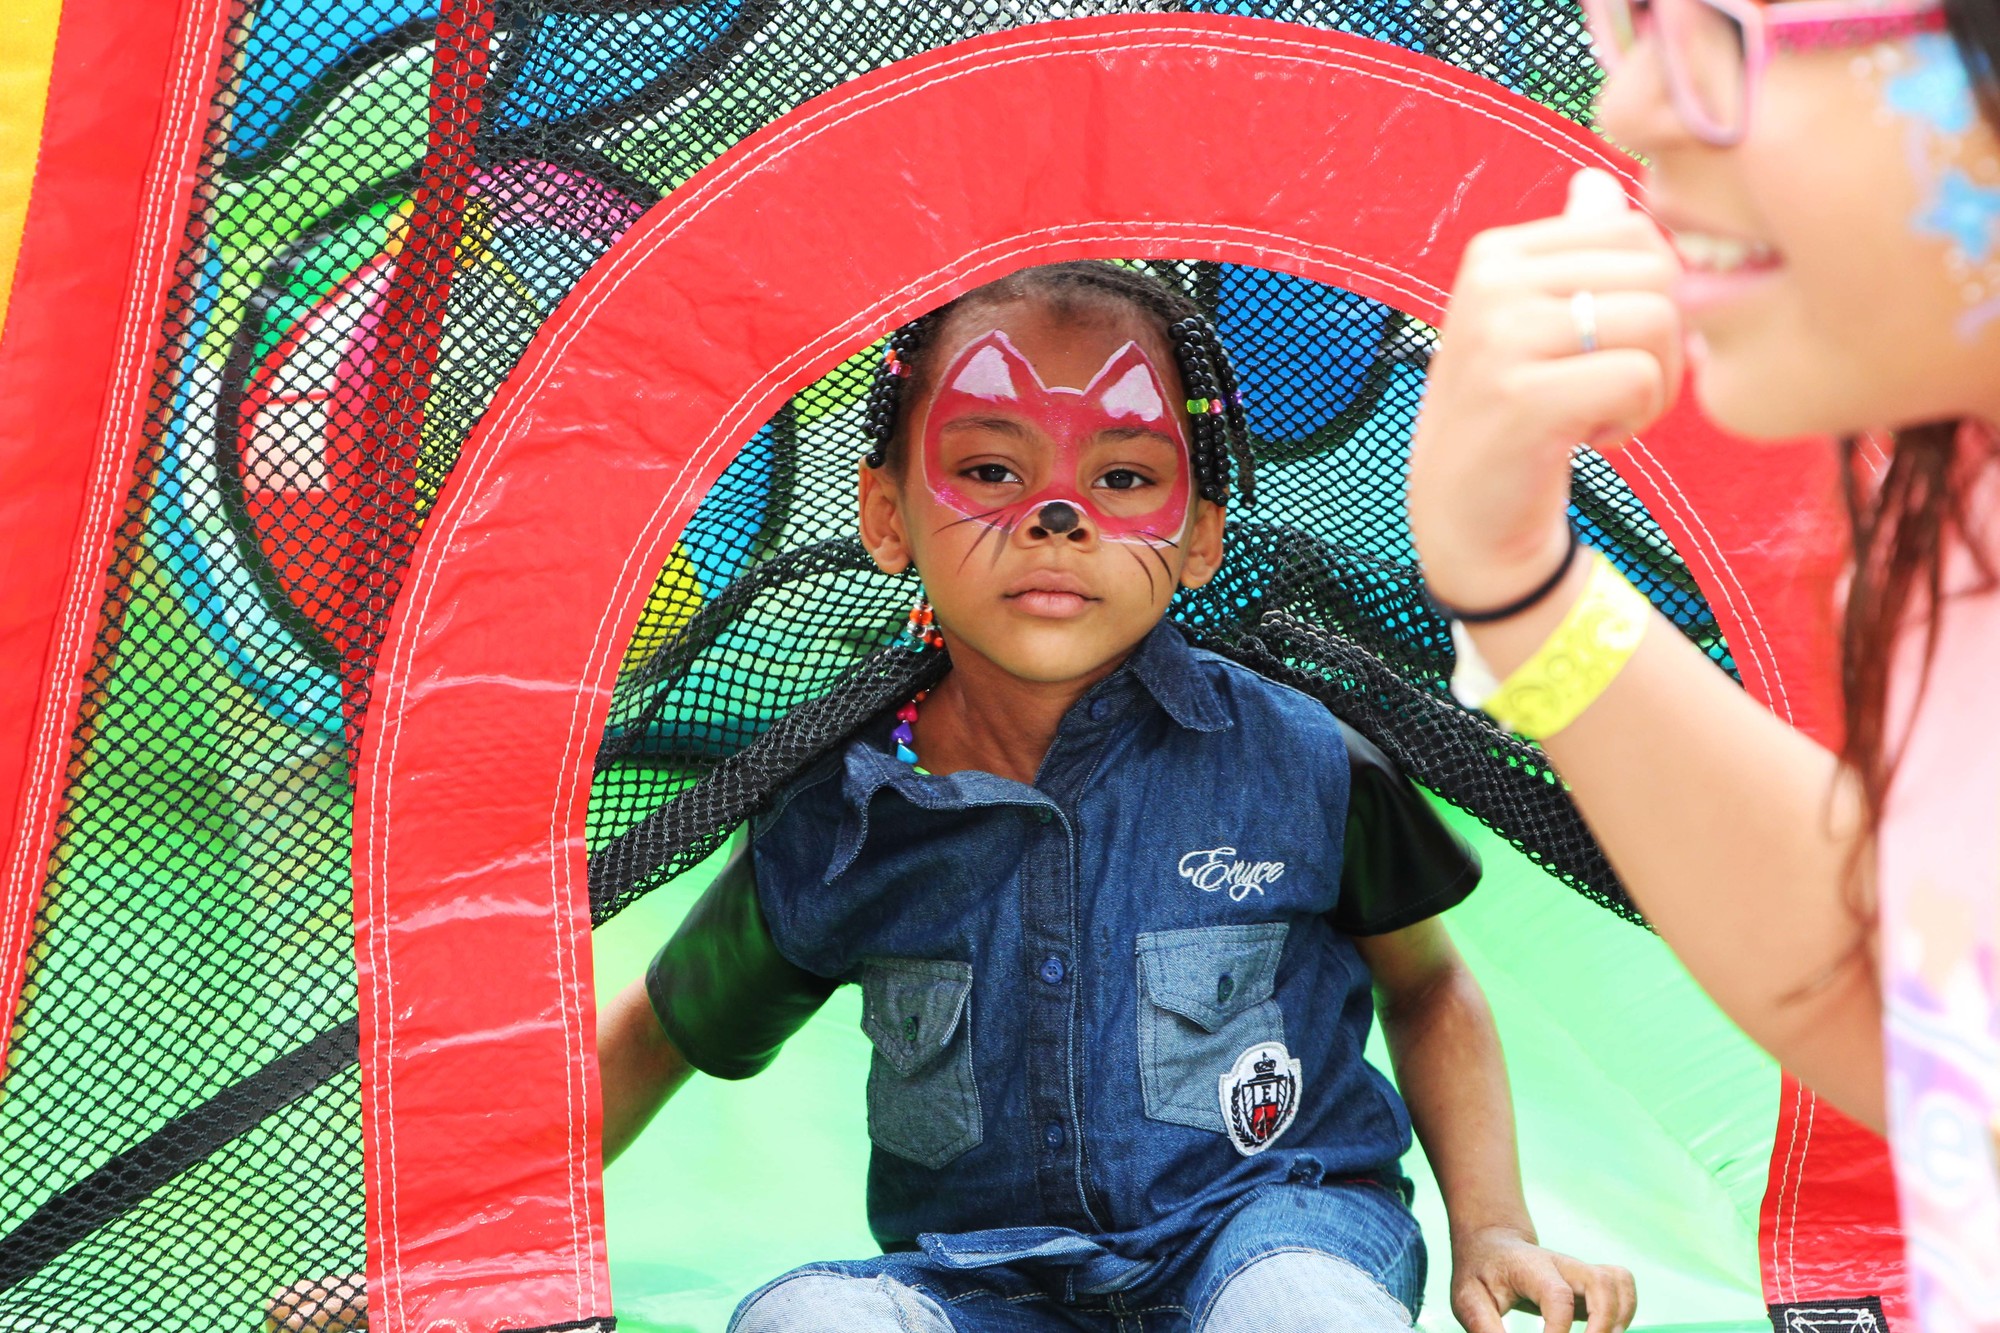 Madison Mayers, 4, took a spin in the bounce house and had her face painted.